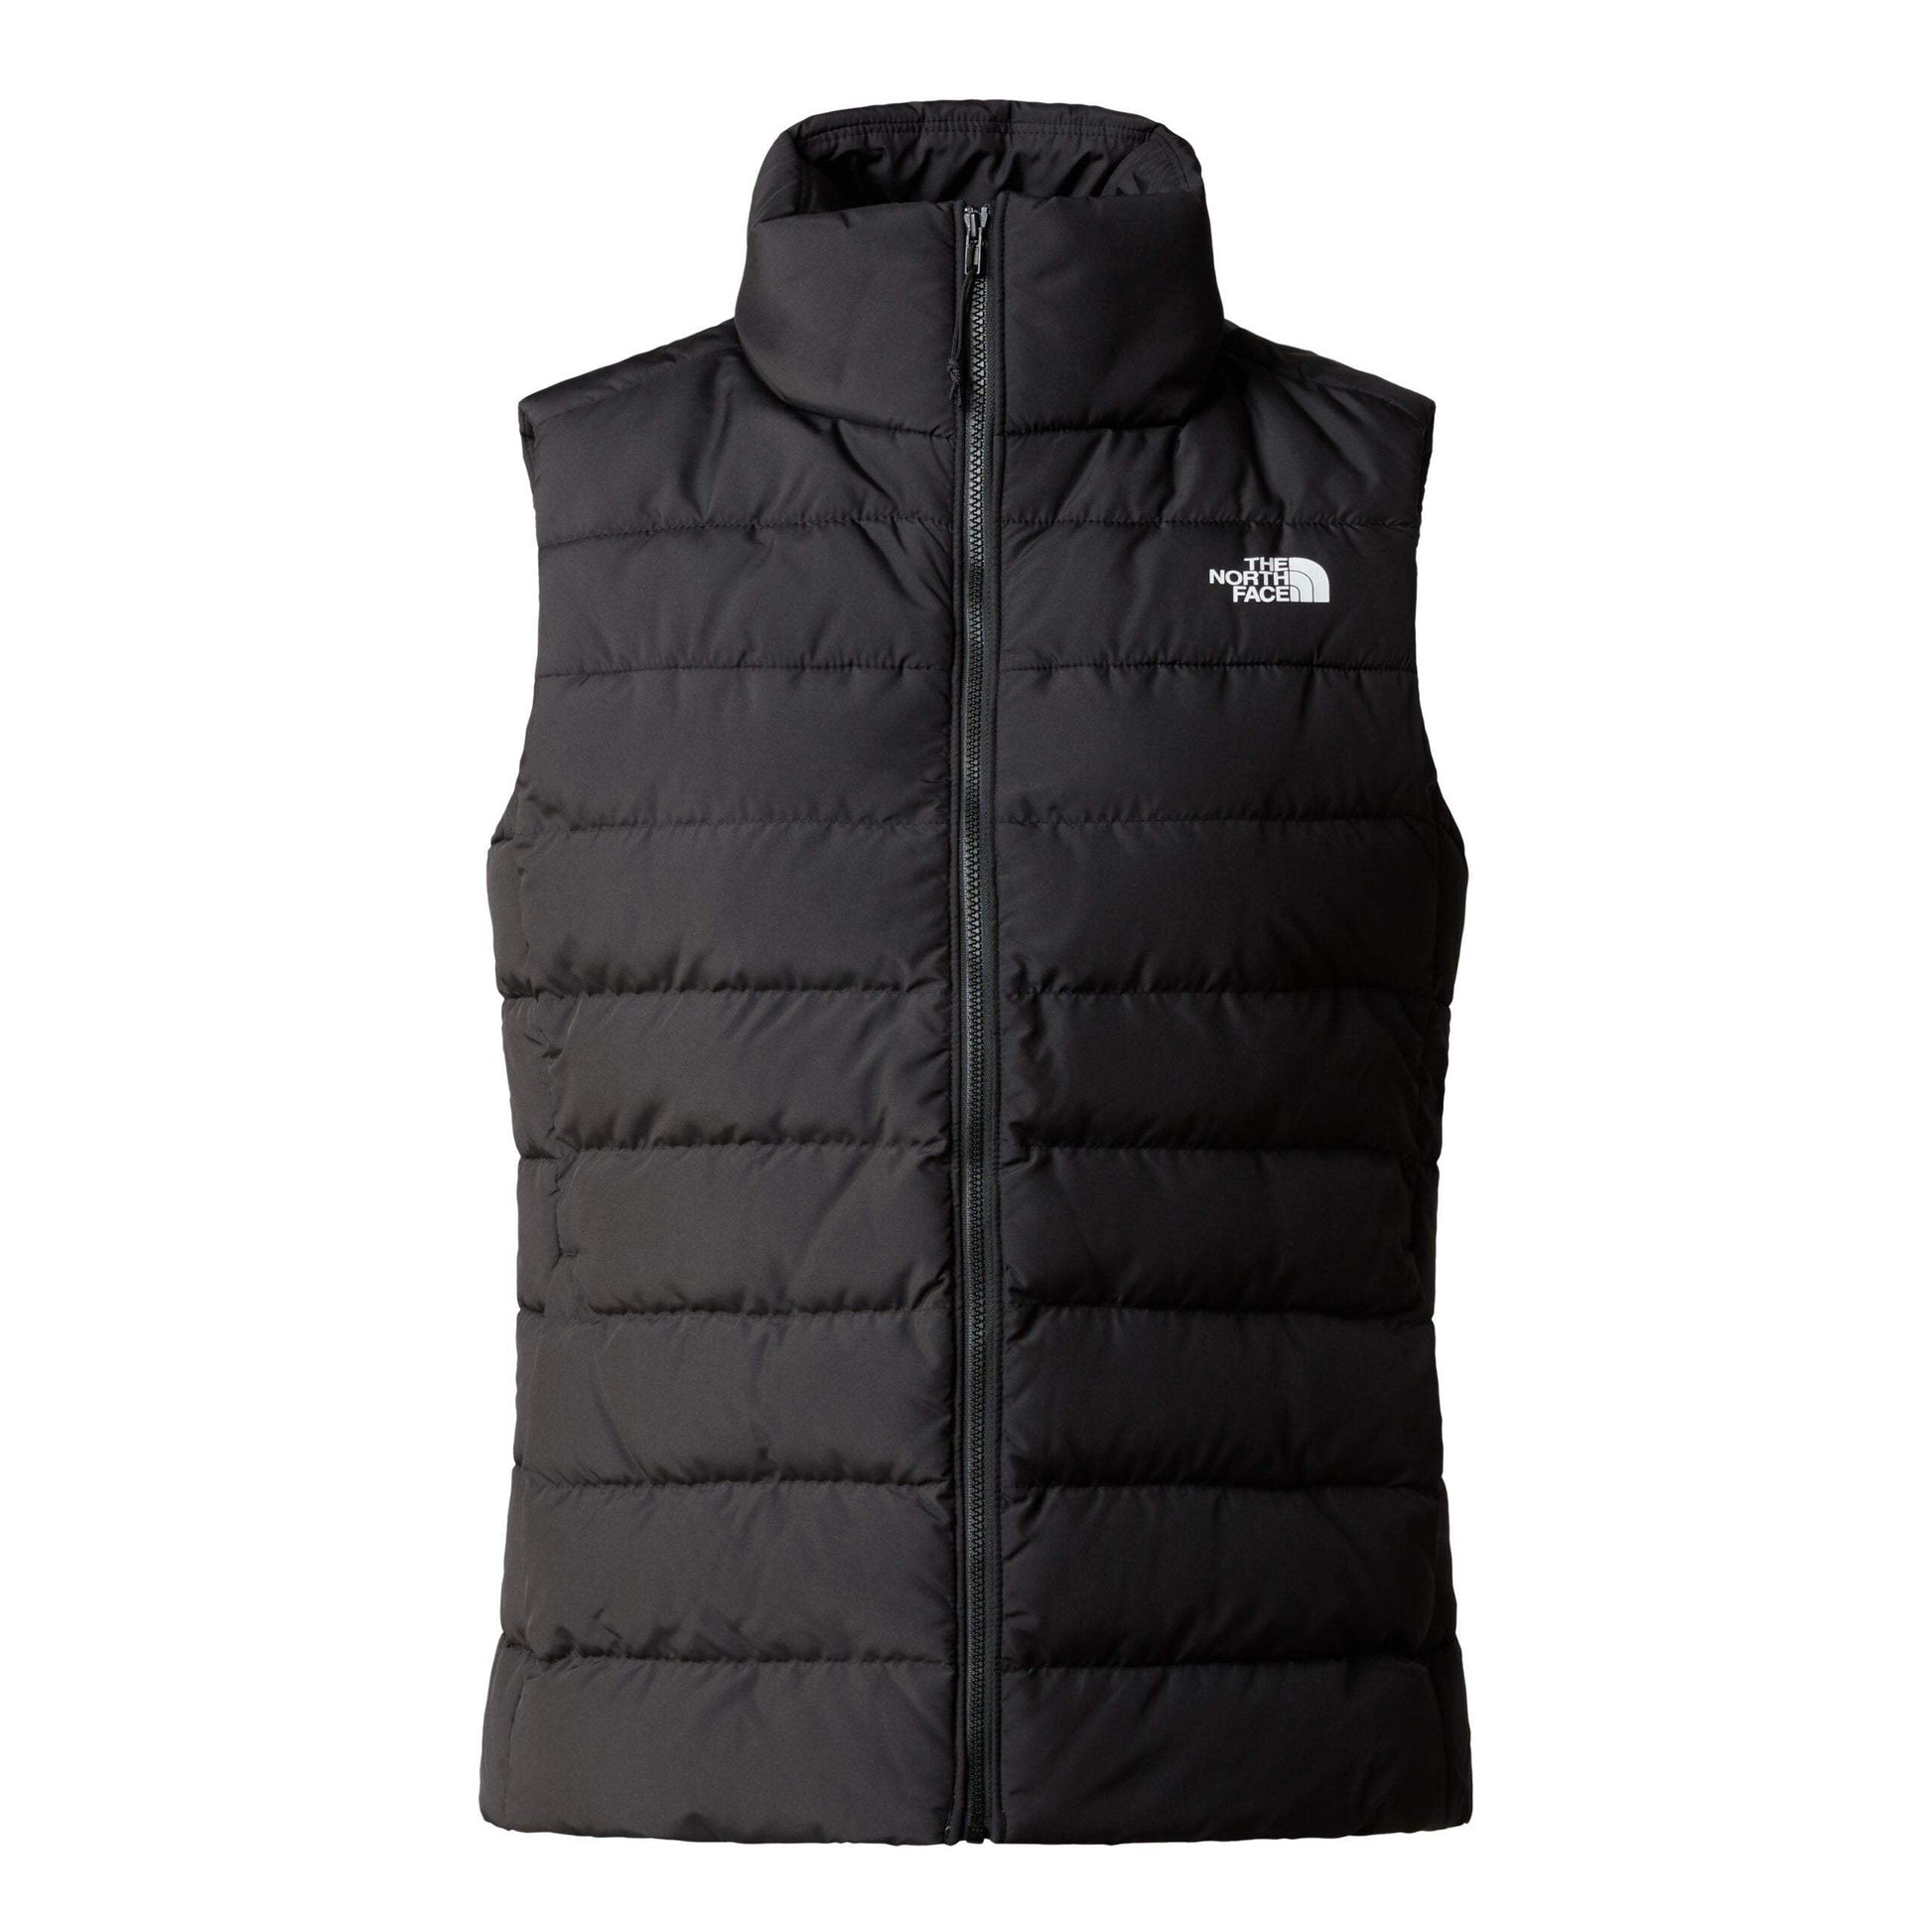 Women’s Aconcagua Vest by The North Face - The Luxury Promotional Gifts Company Limited